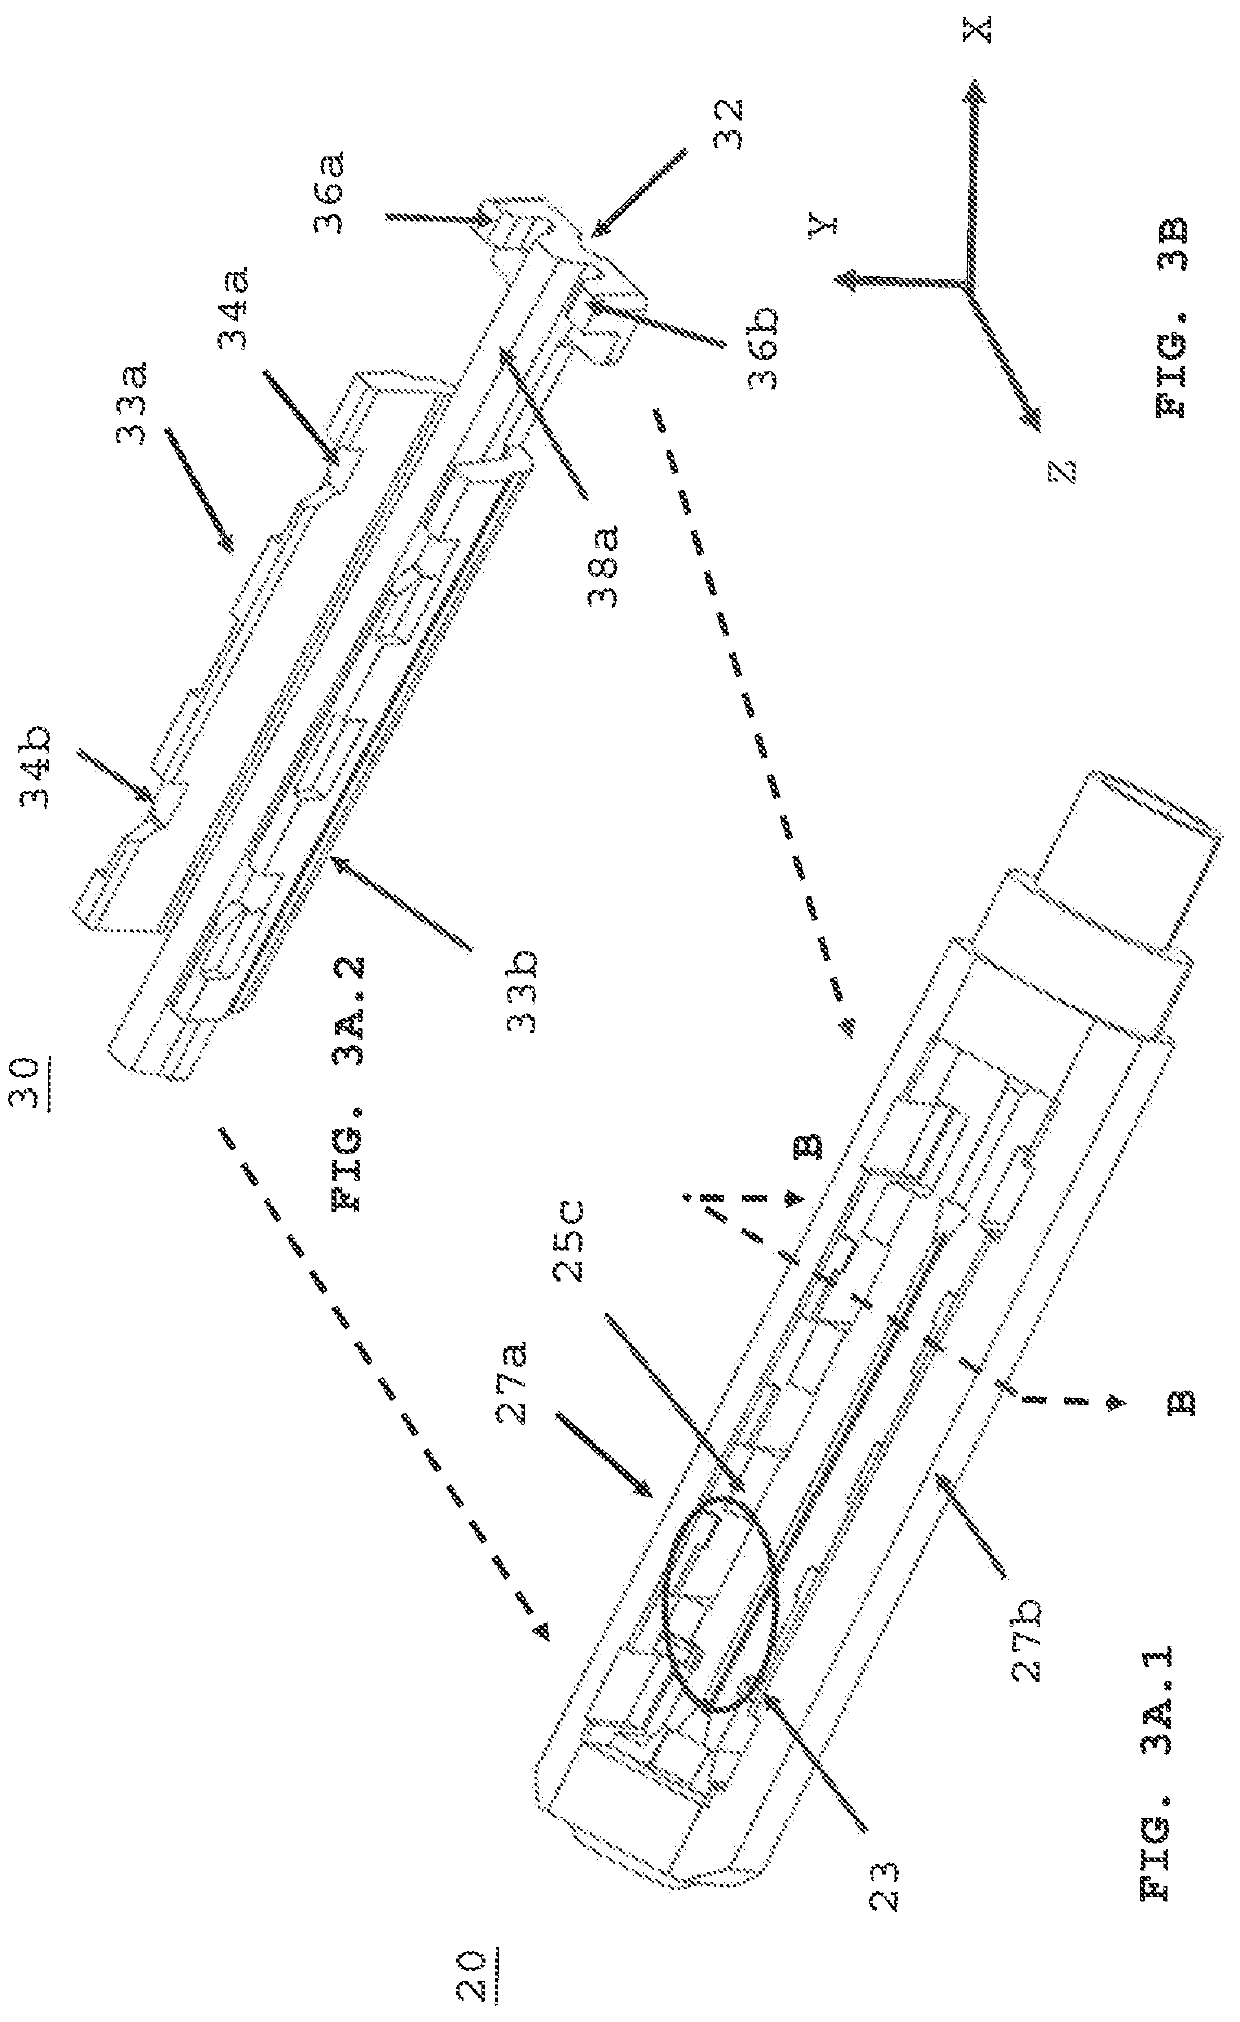 Mechanical splice assembly for splicing opposing optical fibers within a fiber optic connector and method of performing the same